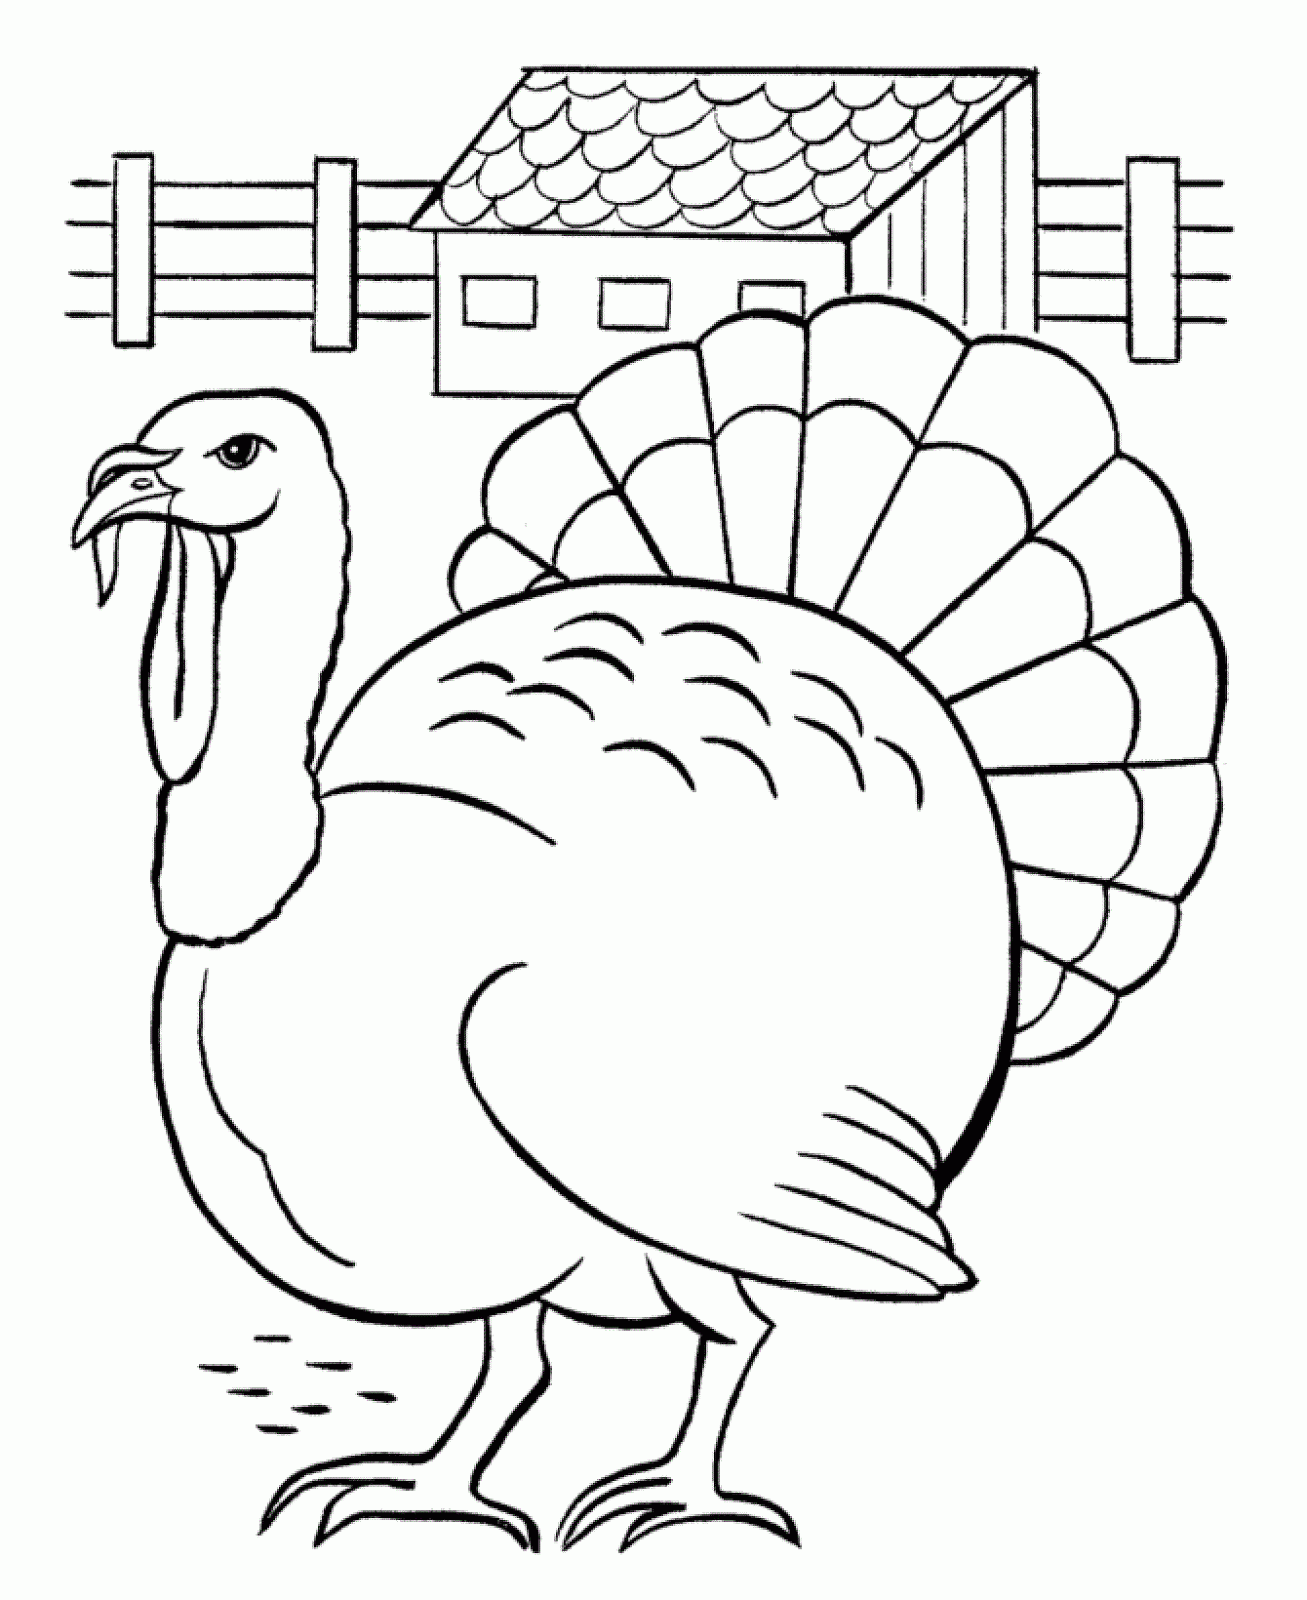 Printable Thanksgiving Coloring Page for Kids of a Cute Cartoon Turkey